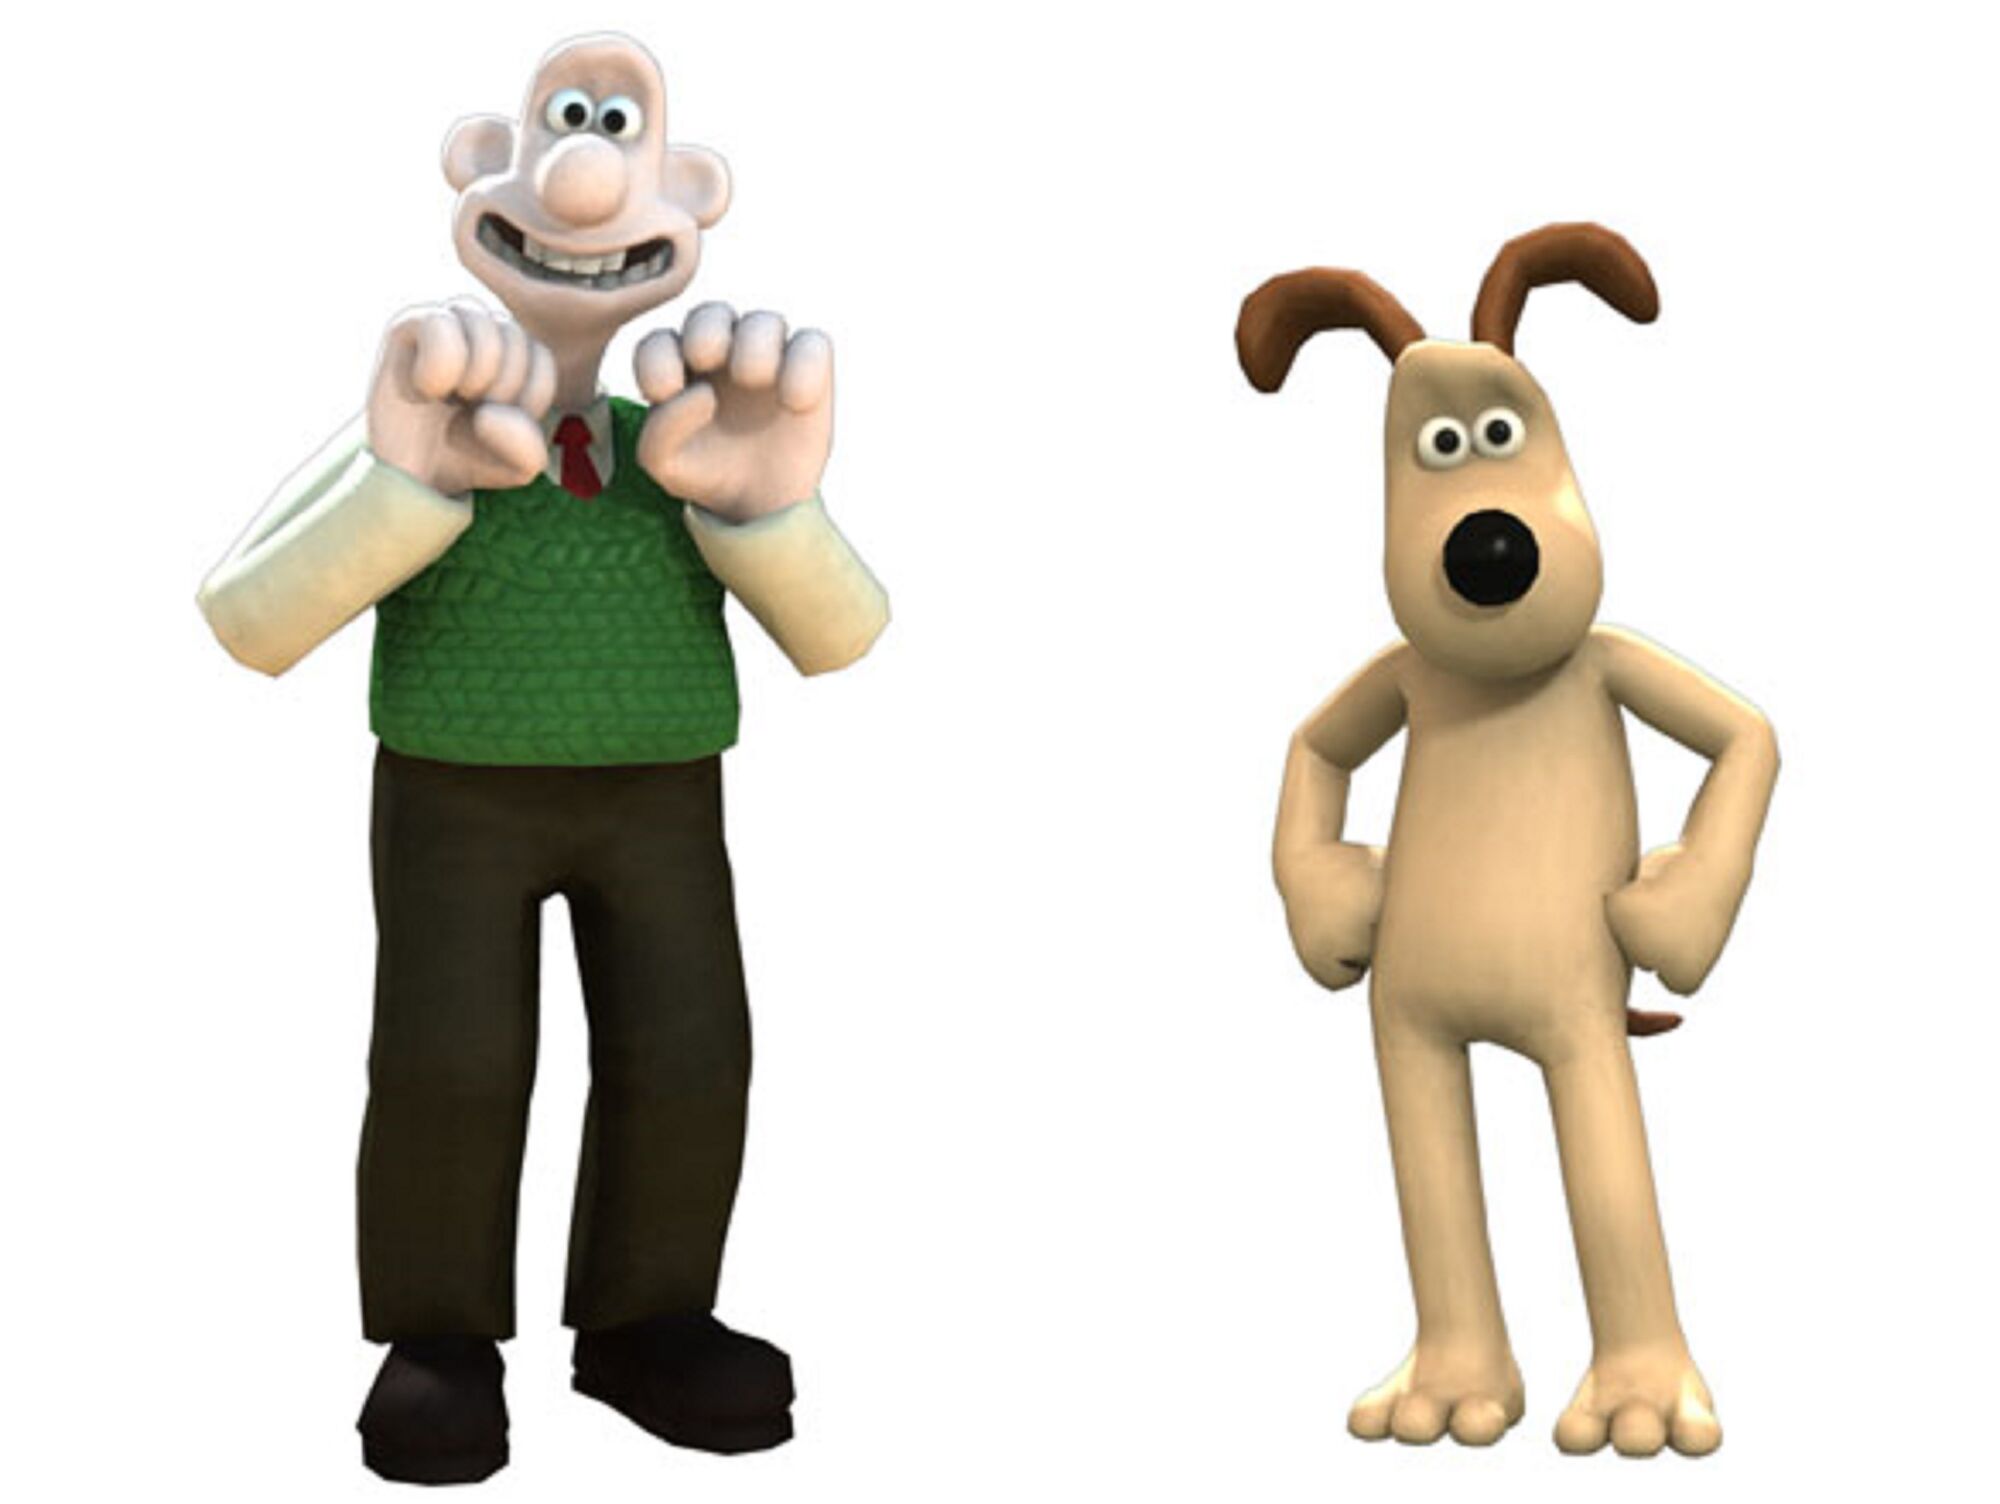 Wallace and Gromit voice actor Peter Sallis dies aged 96 - ABC ...